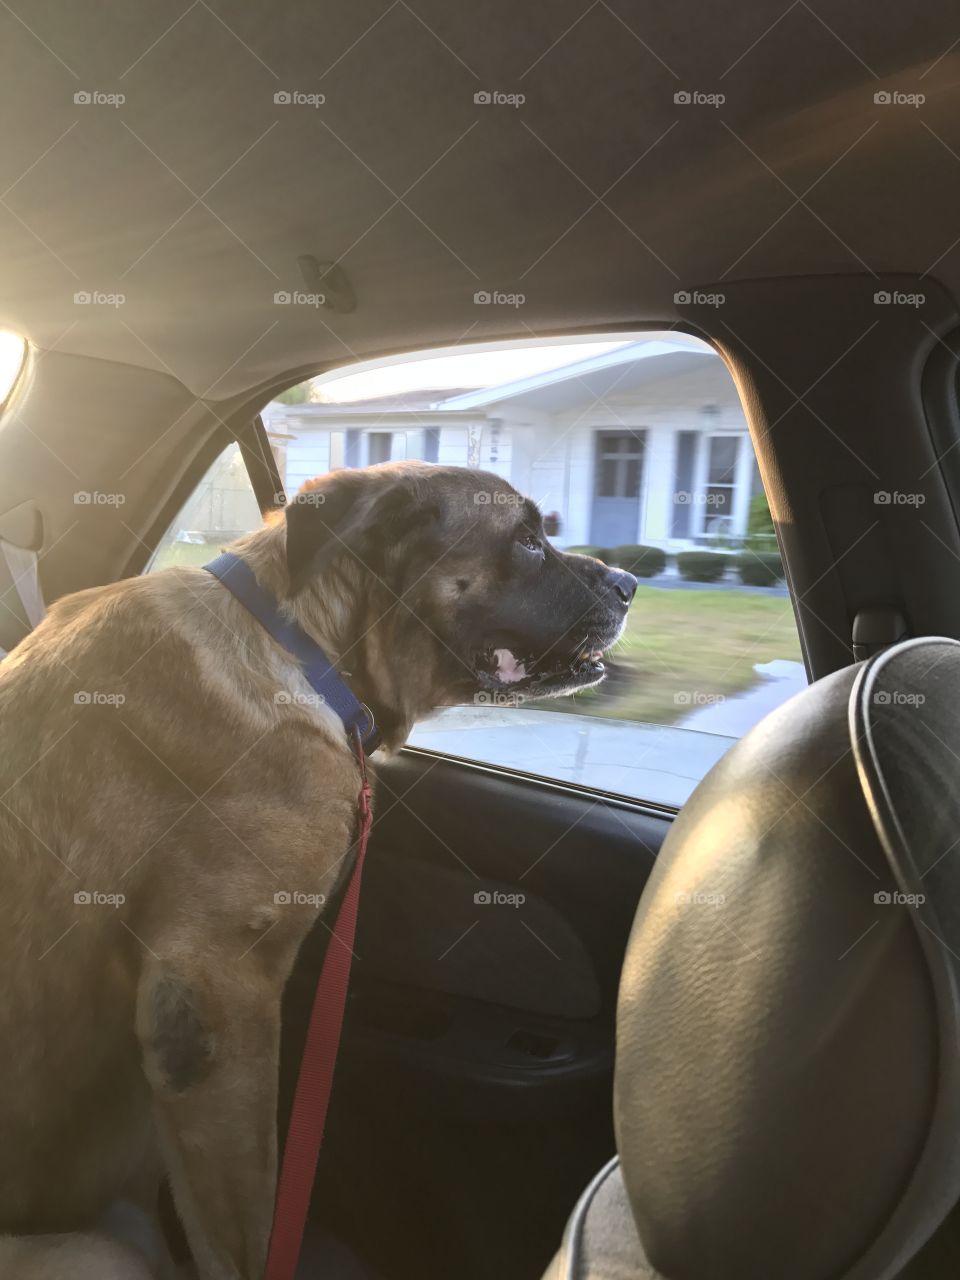 Bear going for a car ride